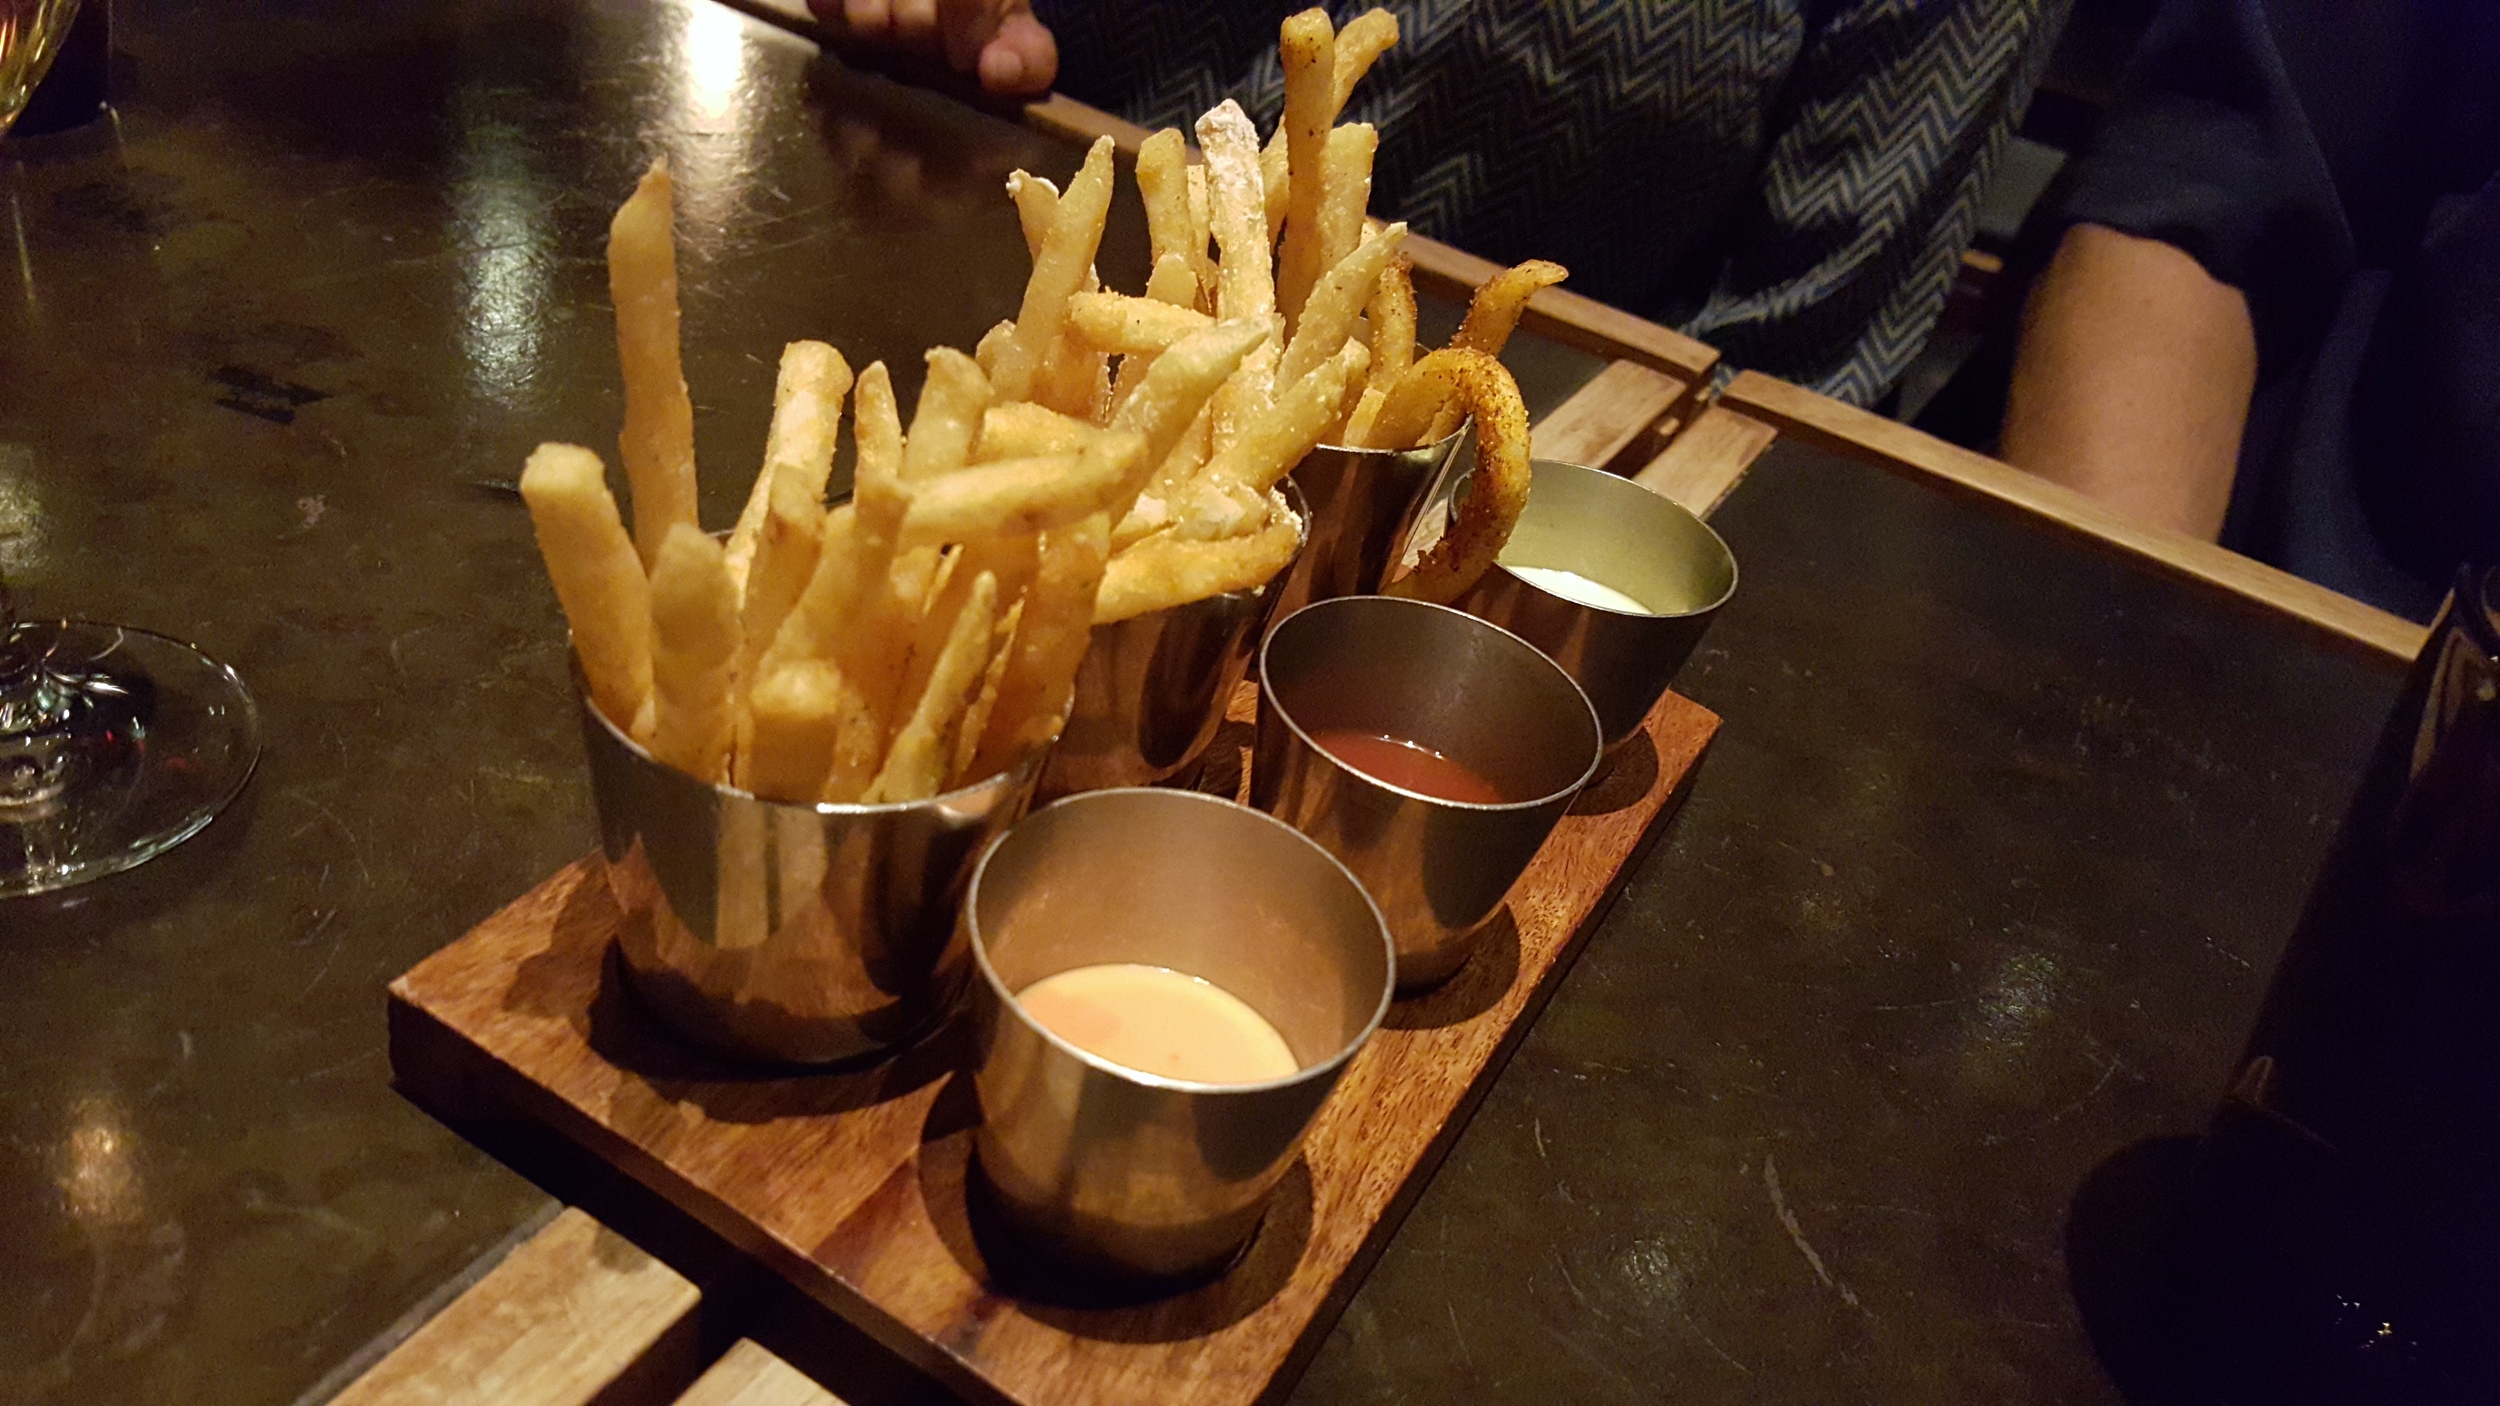 The signature duck fat fries